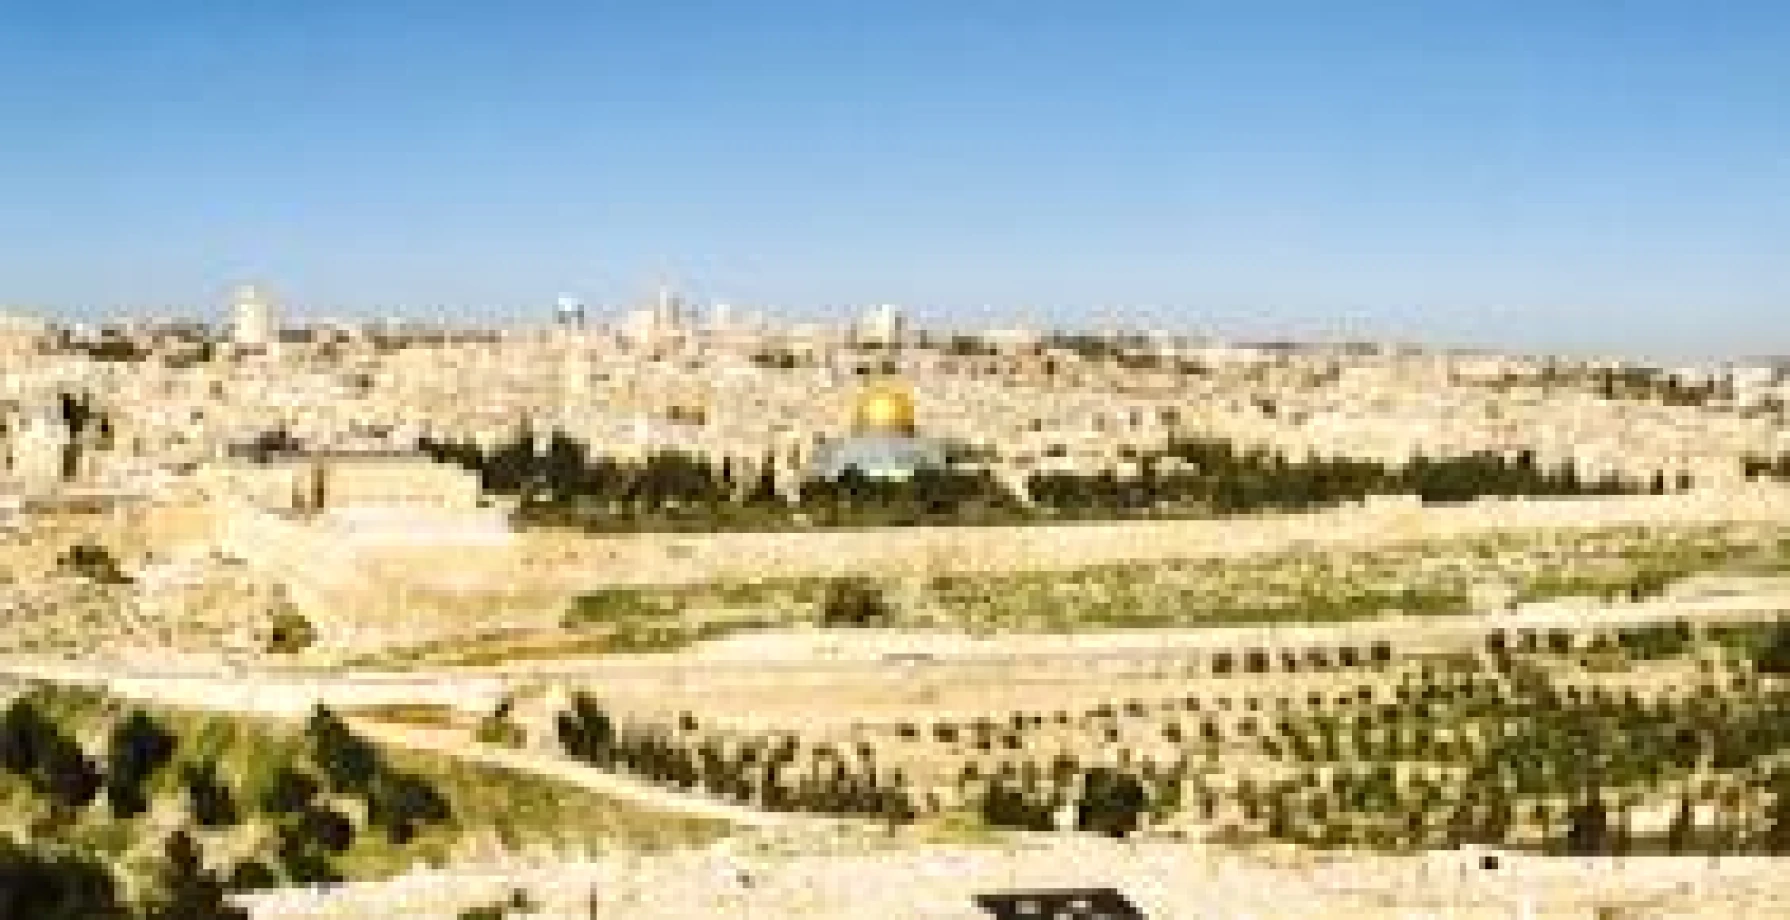 An Invitation to experience a spiritual journey through the Holy Land